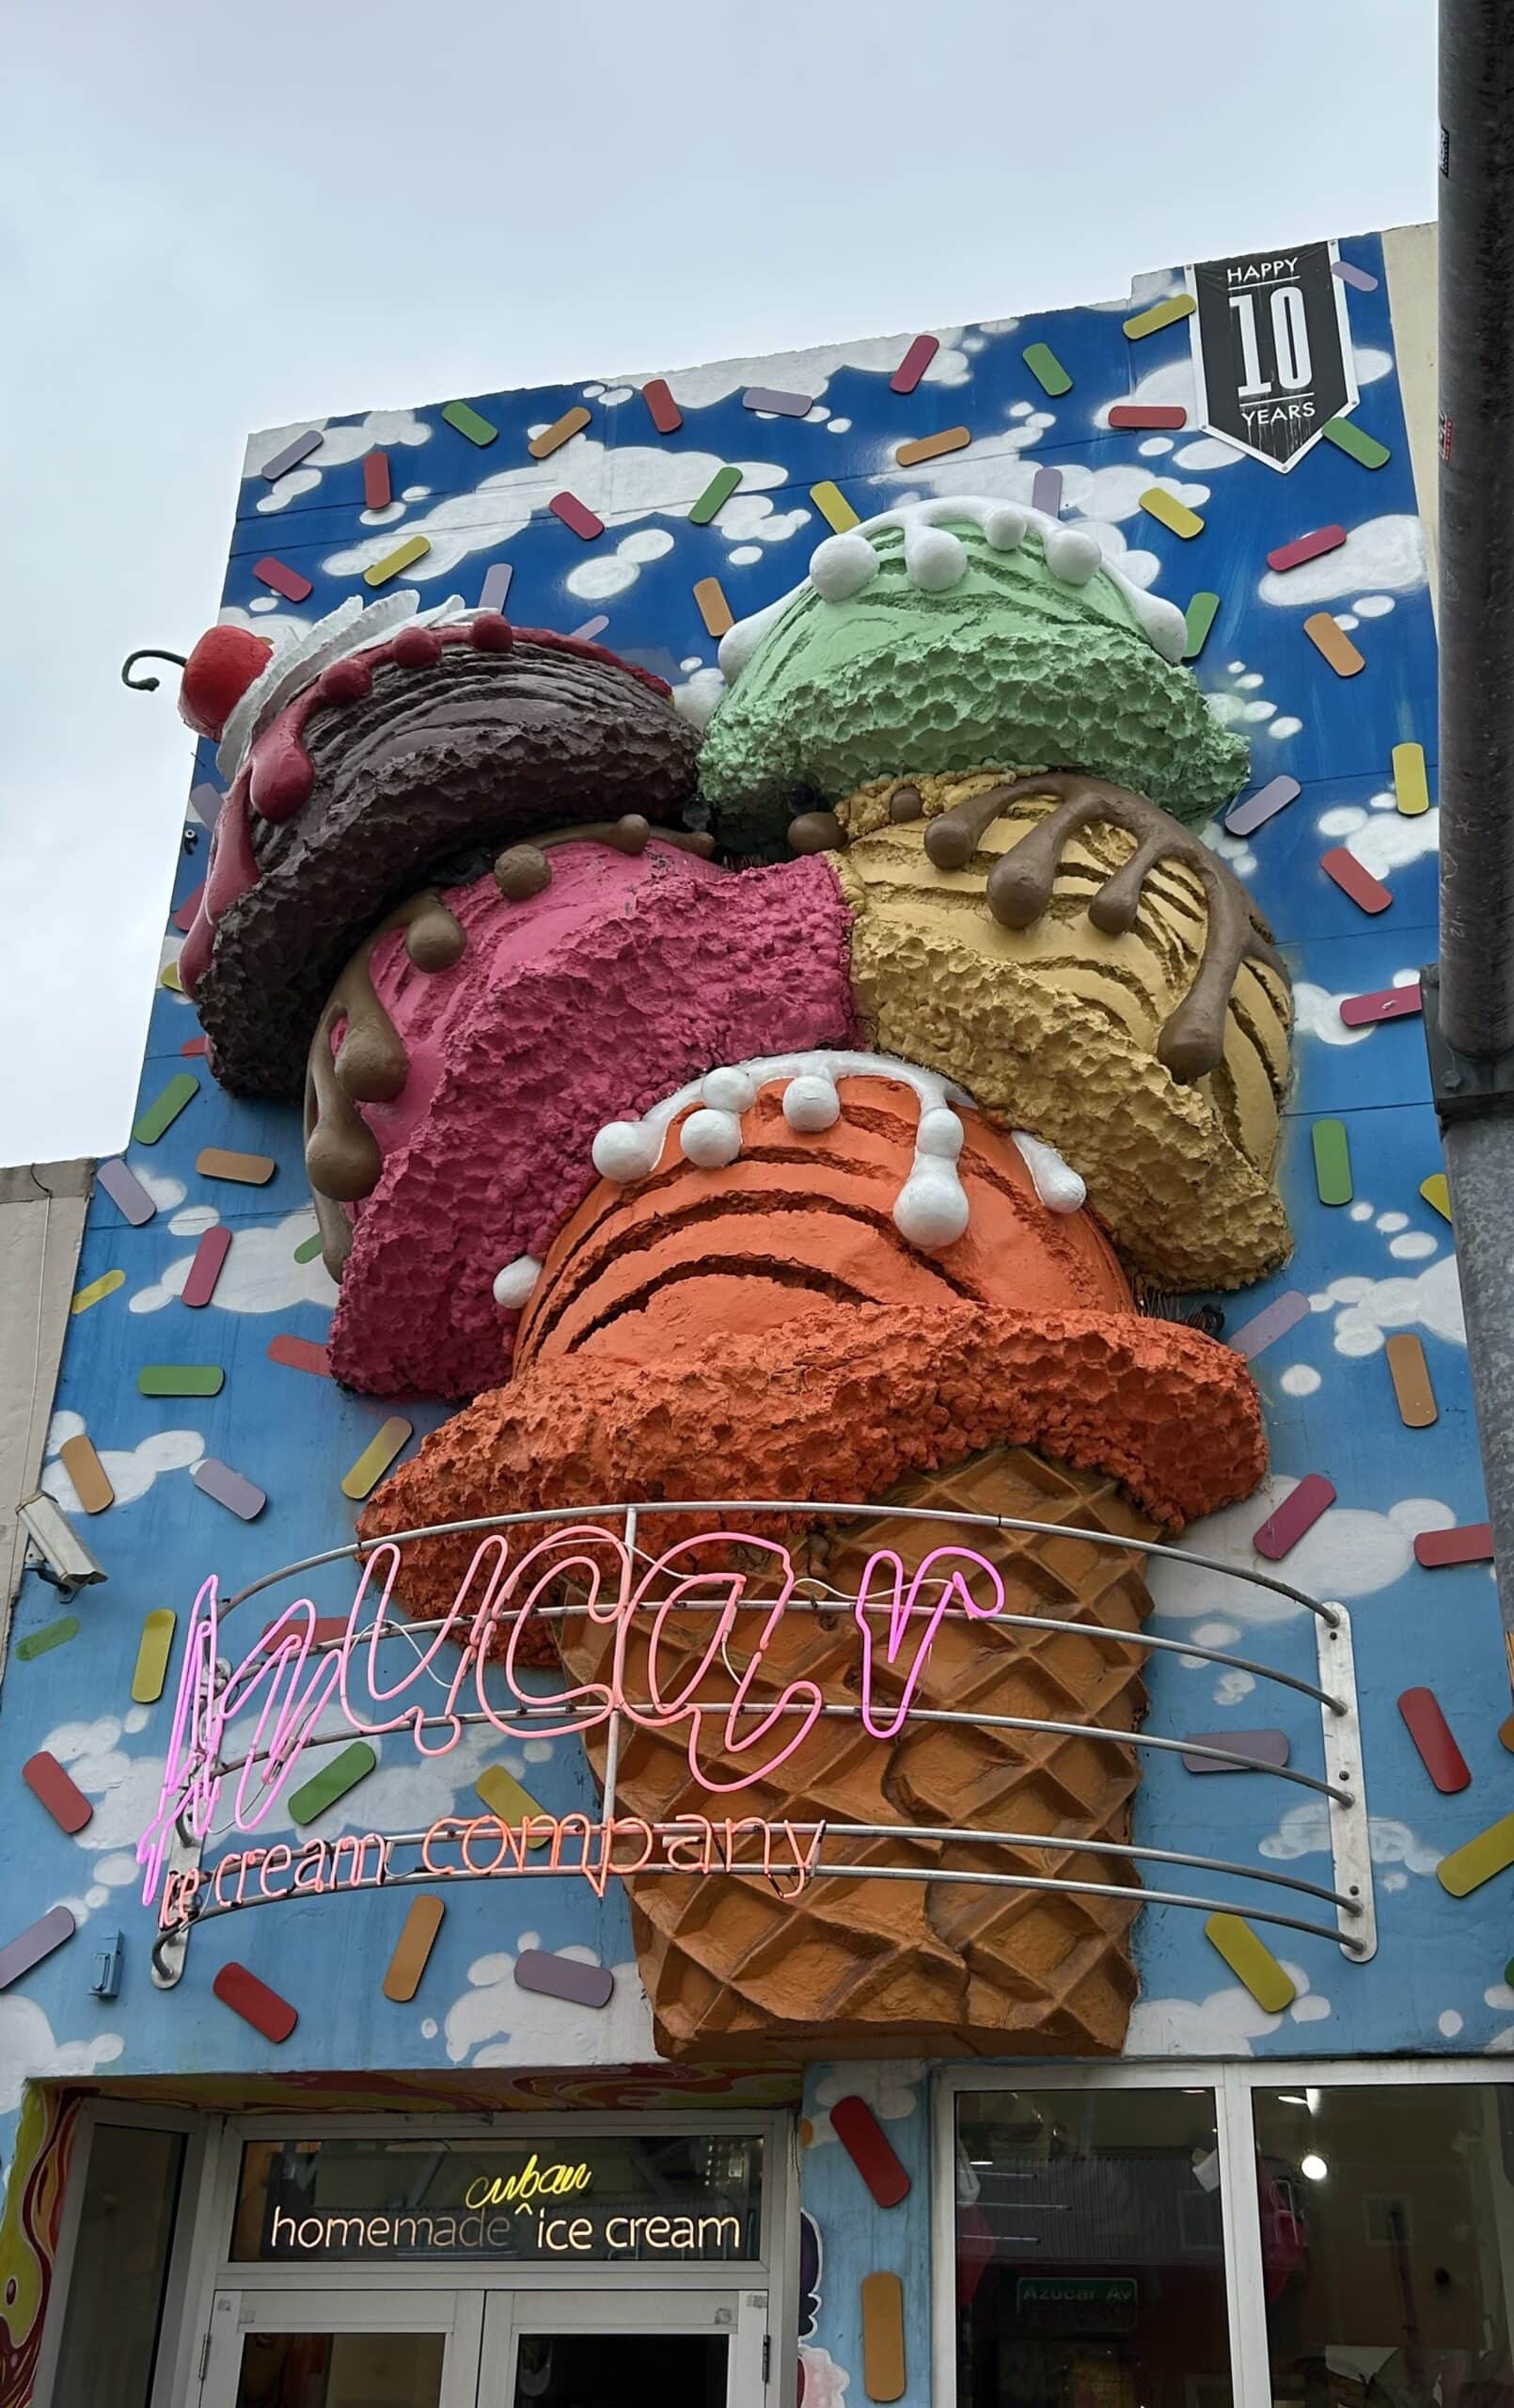 Exterior view of Azucar Ice Cream Company, celebrating 10 years, with a vibrant 3D sculpture of stacked, colorful ice cream scoops in various flavors on top of a waffle cone, against a playful blue wall with scattered sprinkles.